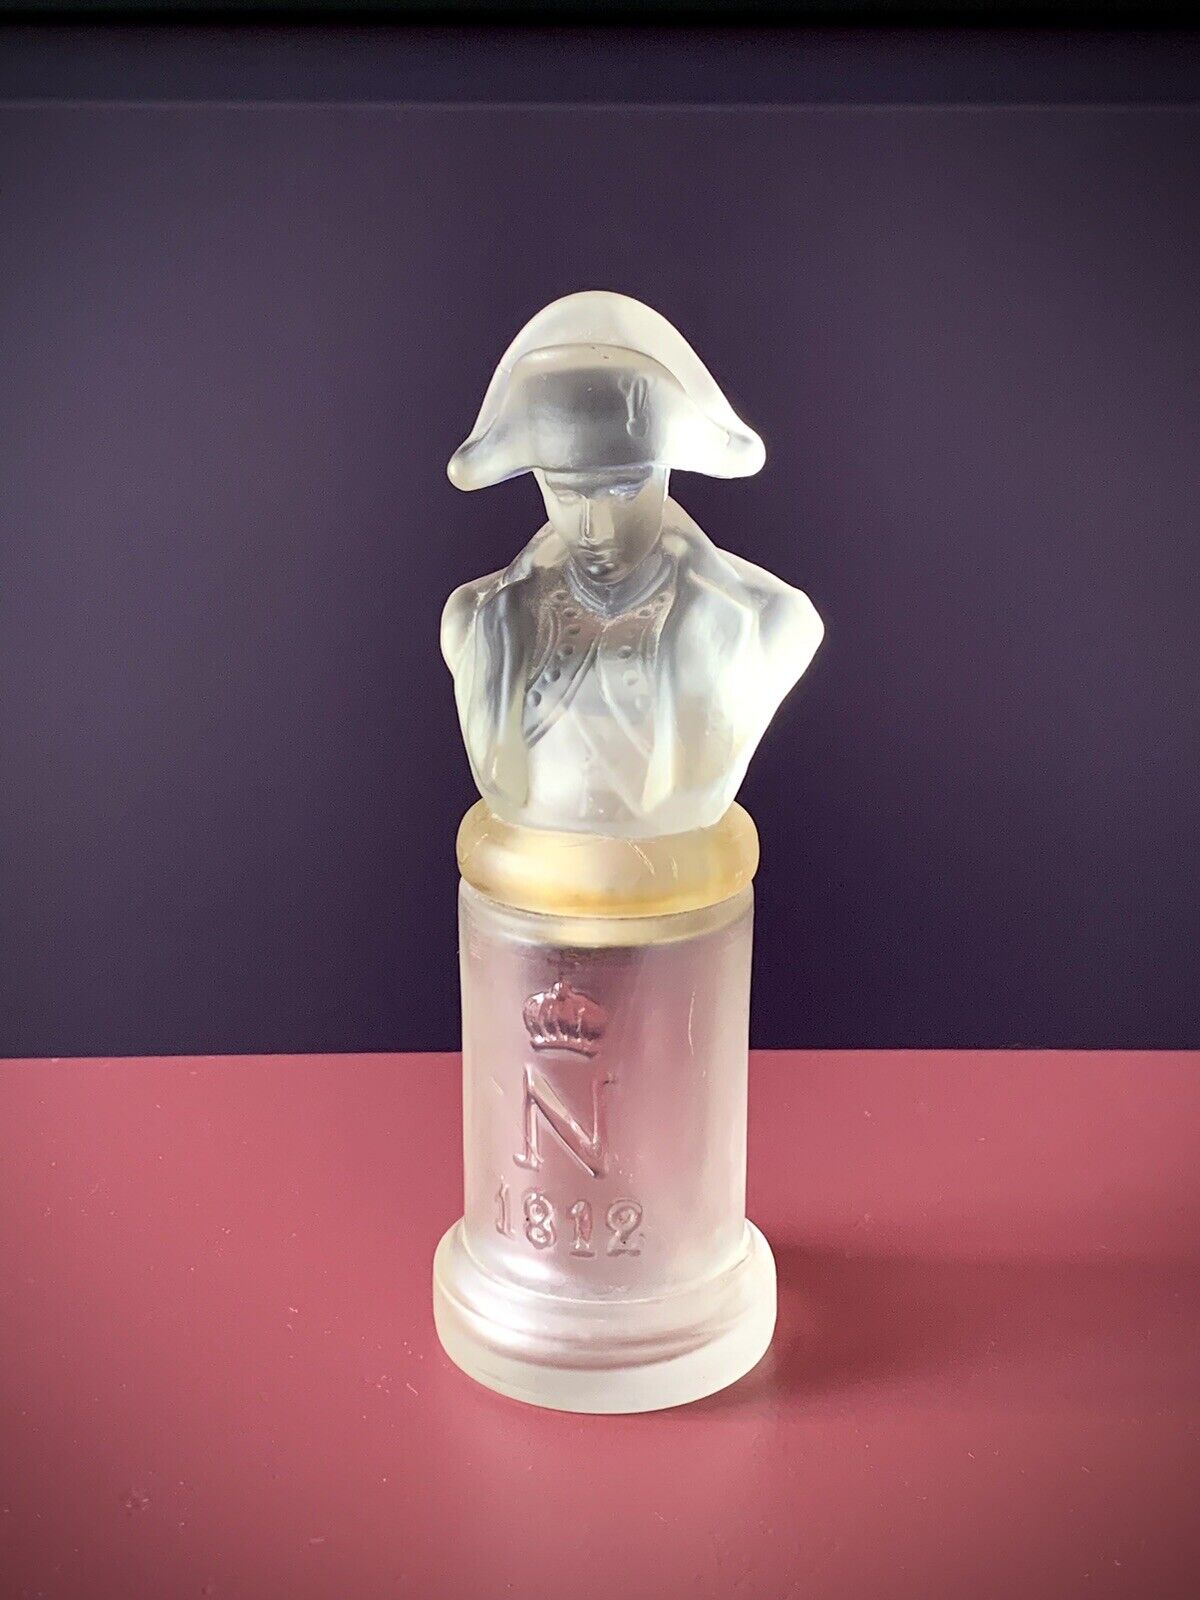 Ultra Rare Vintage Crystal Perfume Bottle Frosted Glass Napoleon 1812